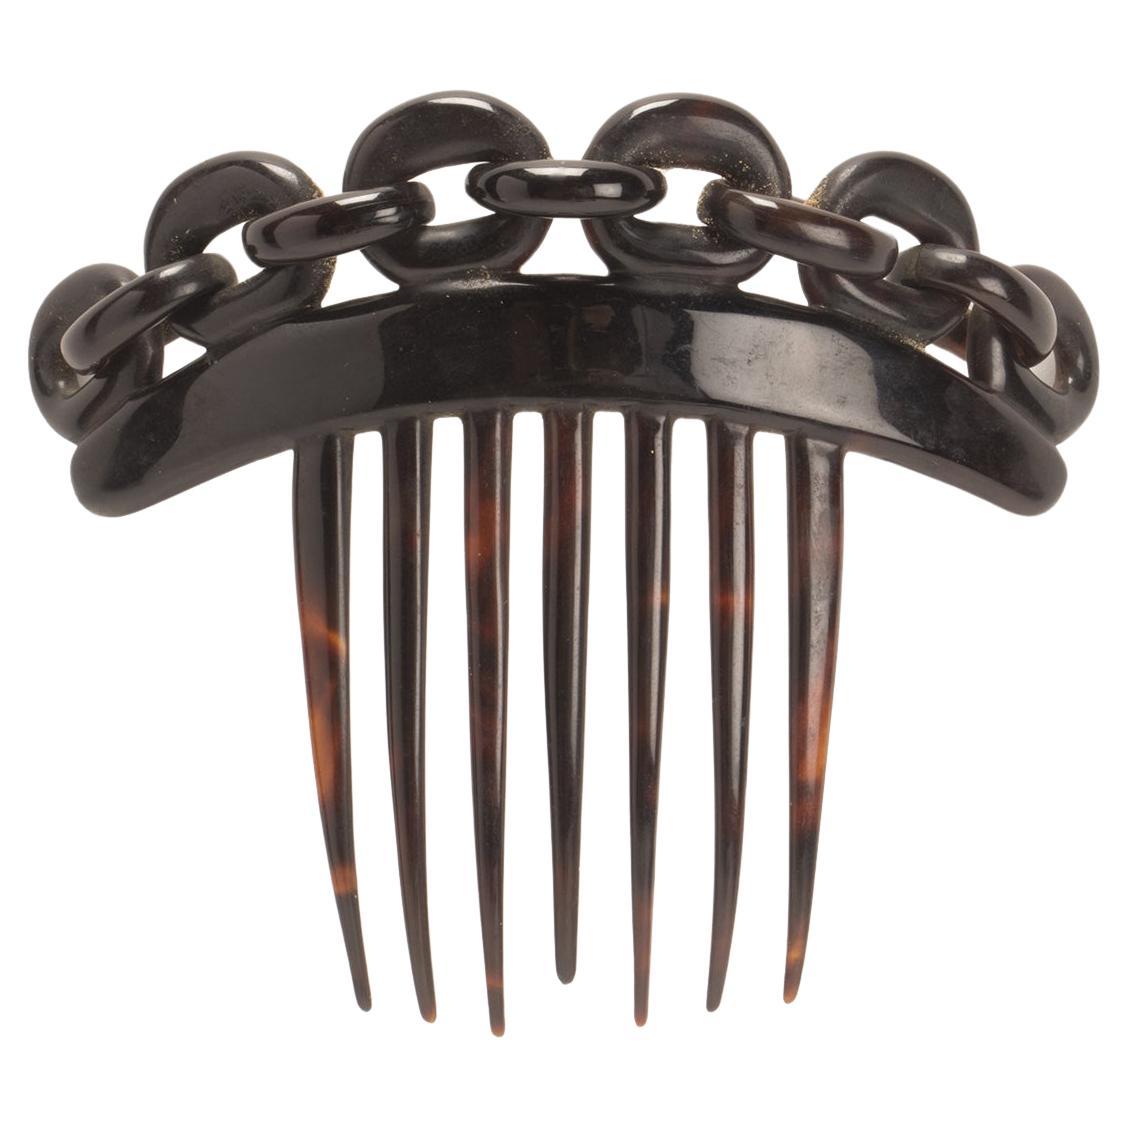 Turtleshell hair comb-diadem with chain motif, France 1900. For Sale